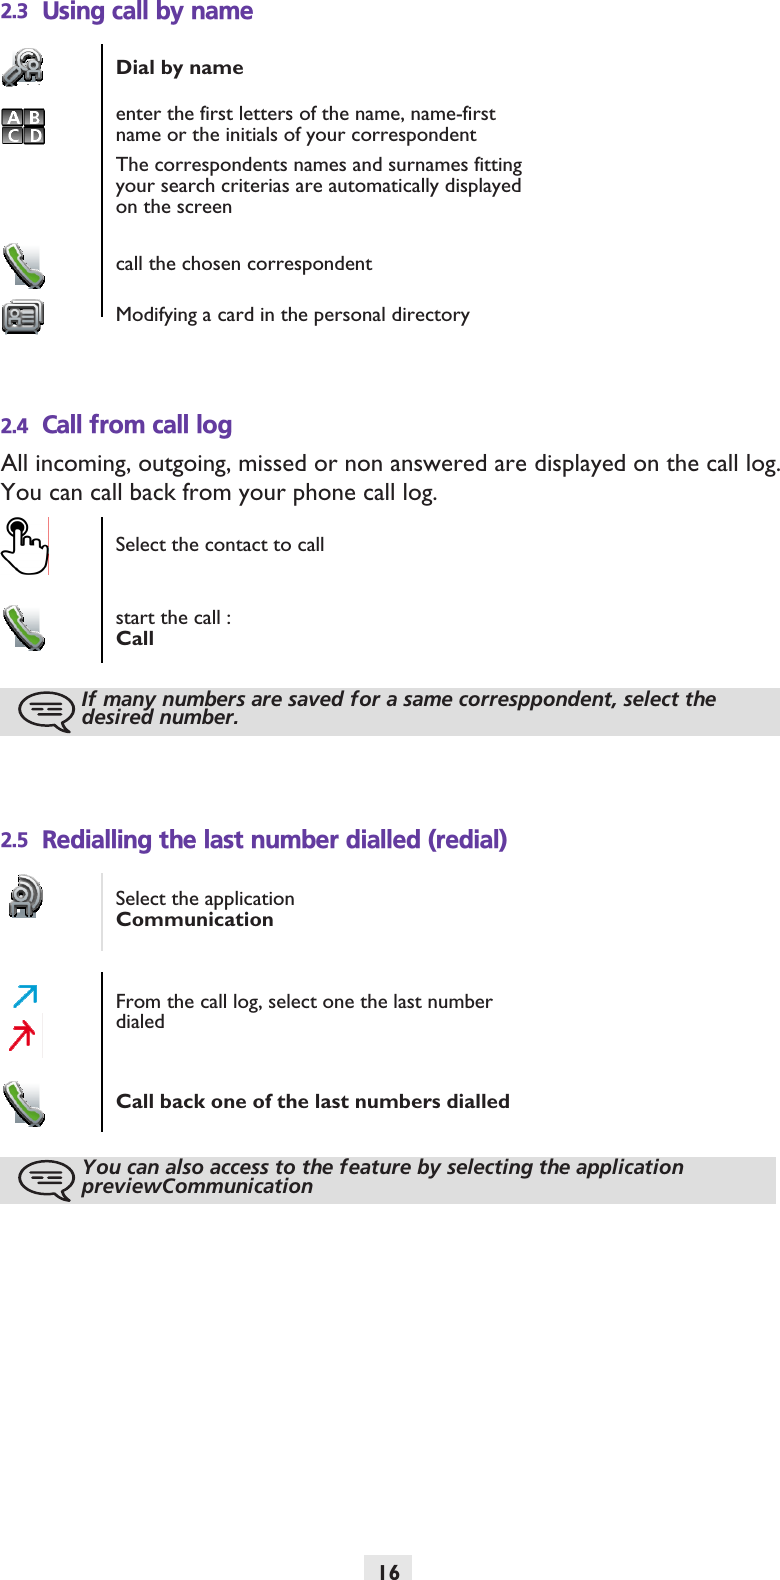 162.3 Using call by name2.4 Call from call logAll incoming, outgoing, missed or non answered are displayed on the call log.You can call back from your phone call log.2.5 Redialling the last number dialled (redial)Dial by nameenter the first letters of the name, name-first name or the initials of your correspondentThe correspondents names and surnames fitting your search criterias are automatically displayed on the screencall the chosen correspondentModifying a card in the personal directorySelect the contact to callstart the call :CallIf many numbers are saved for a same corresppondent, select the desired number.Select the applicationCommunicationFrom the call log, select one the last number dialedCall back one of the last numbers dialledYou can also access to the feature by selecting the application previewCommunication